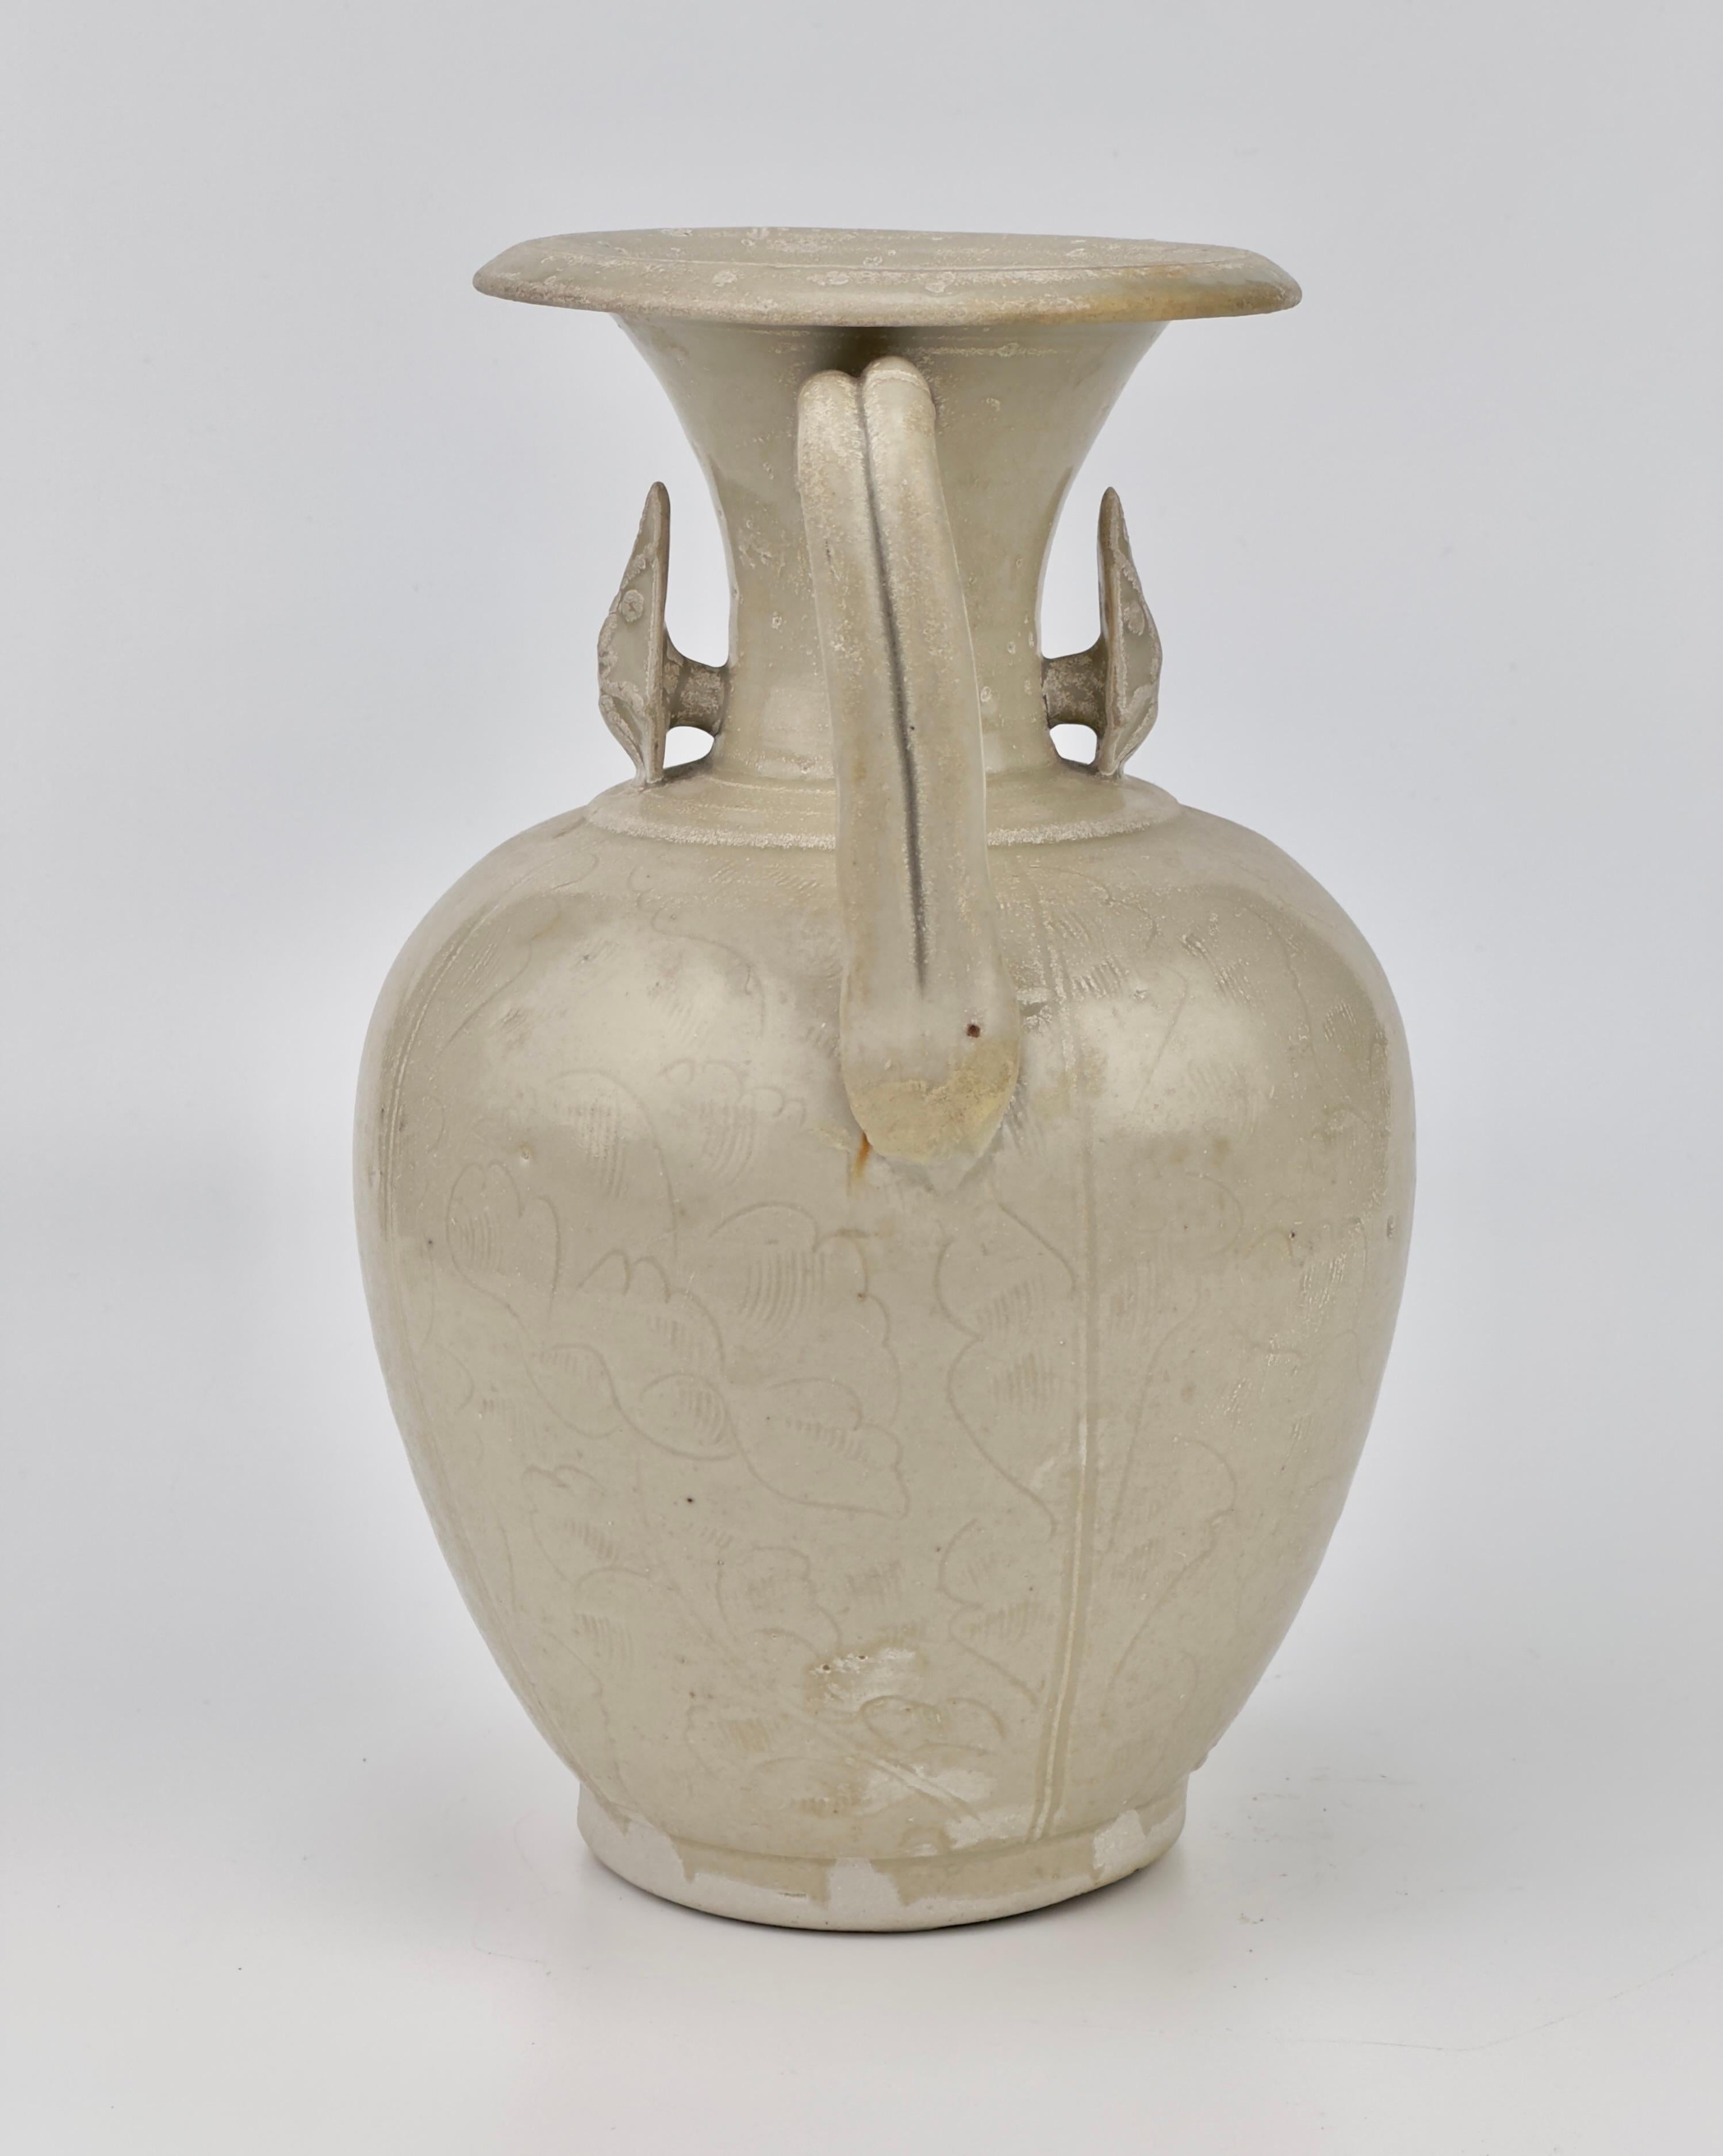 The oviform body is divided into few lobes, and the shoulder is applied with a pair of small loops molded.


Period : Song Dynasty(960~1279)
Type : Ewer
Medium : Zhejiang celadon
Provenance : Acquired in late 1990s from Hongkong
Reference :
1) Yu